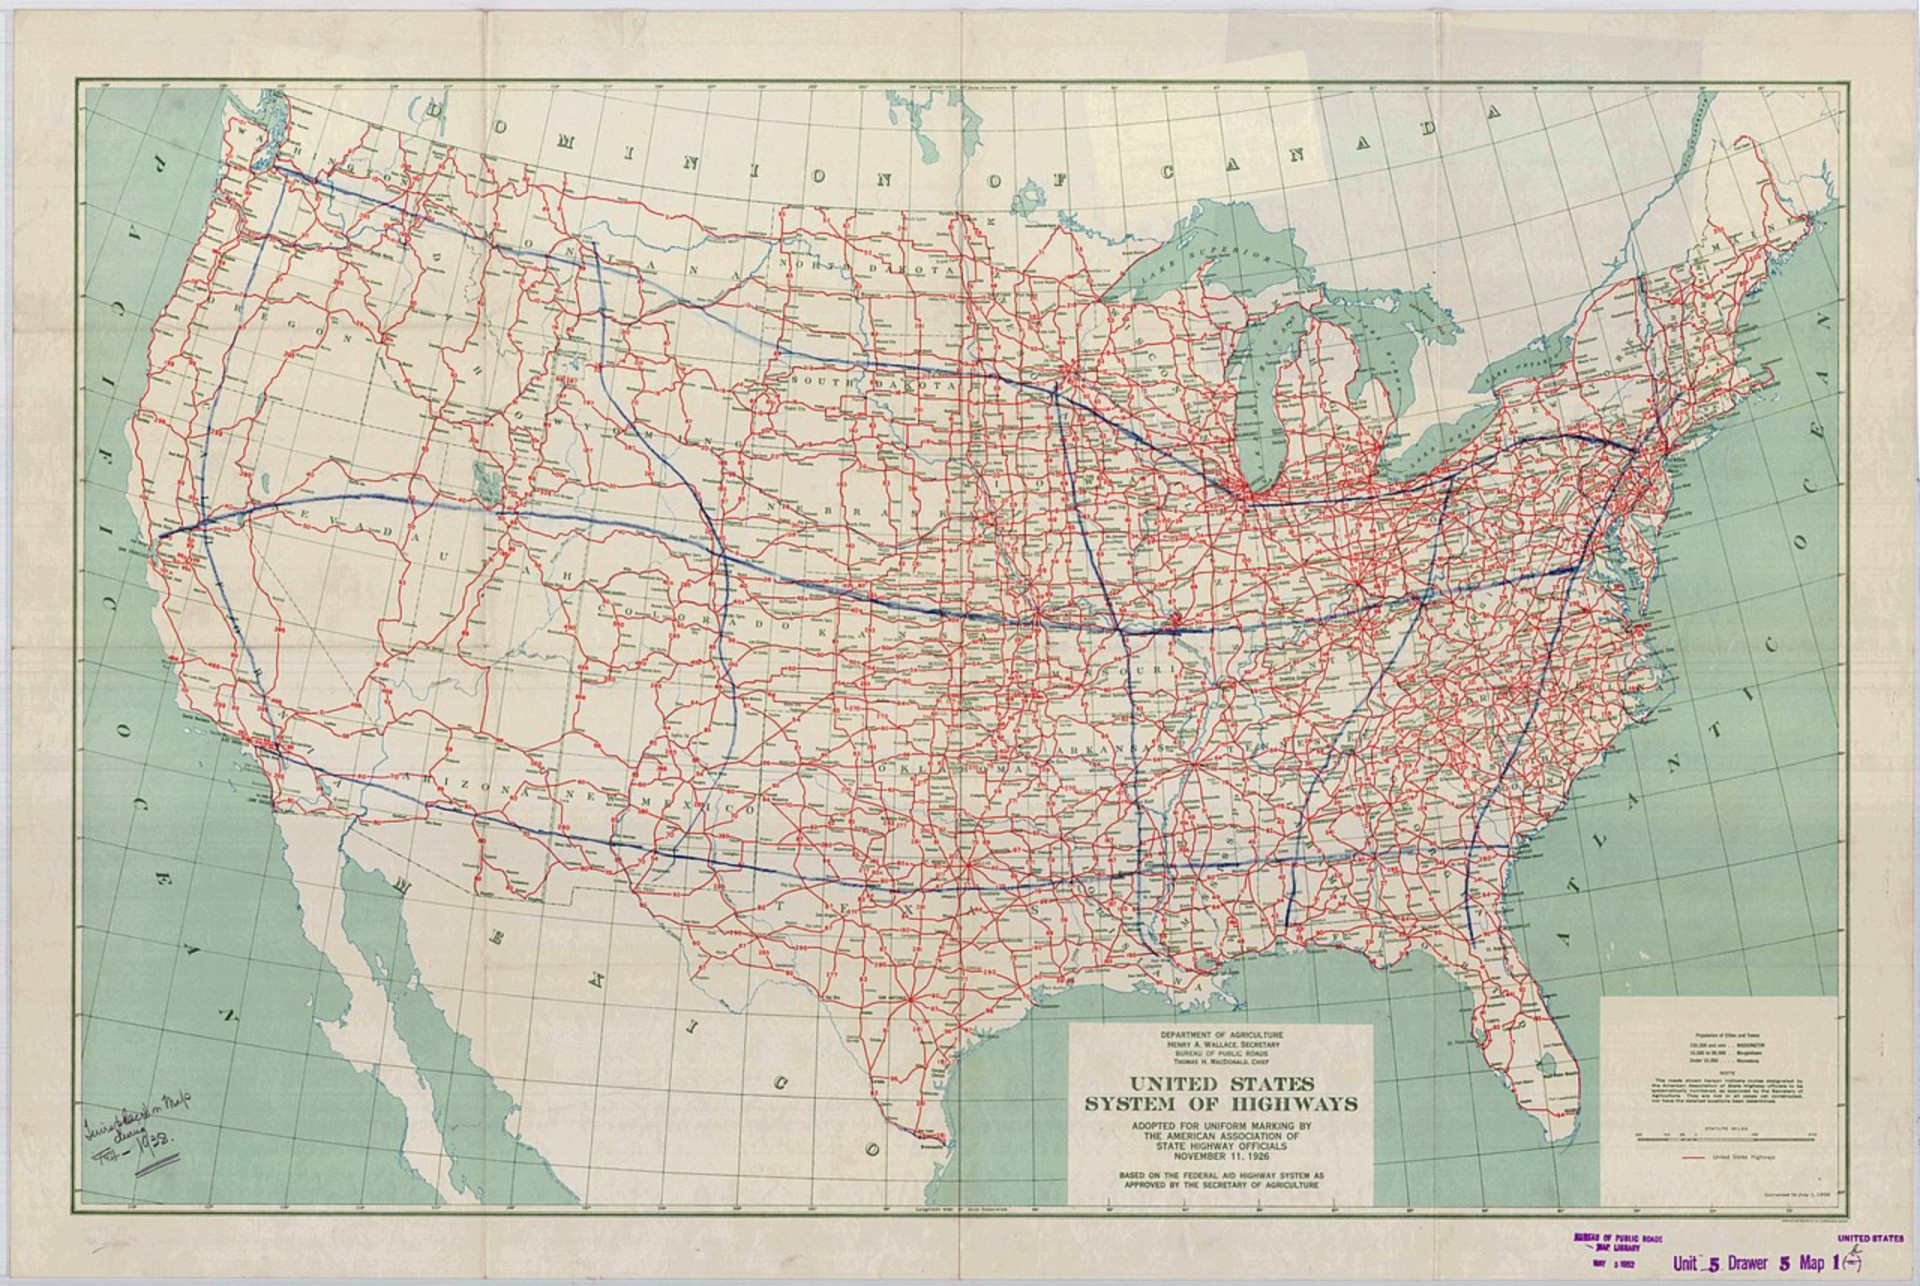 <p>In 1938, President Franklin D. Roosevelt drew inspiration from Pershing's idea to create a hand-drawn map (pictured) with eight superhighway corridors for the Bureau of Public Roads to study. Roosevelt had sown the seeds of what would become the Interstate Highway System.</p><p><a href="https://www.msn.com/en-us/community/channel/vid-7xx8mnucu55yw63we9va2gwr7uihbxwc68fxqp25x6tg4ftibpra?cvid=94631541bc0f4f89bfd59158d696ad7e">Follow us and access great exclusive content every day</a></p>